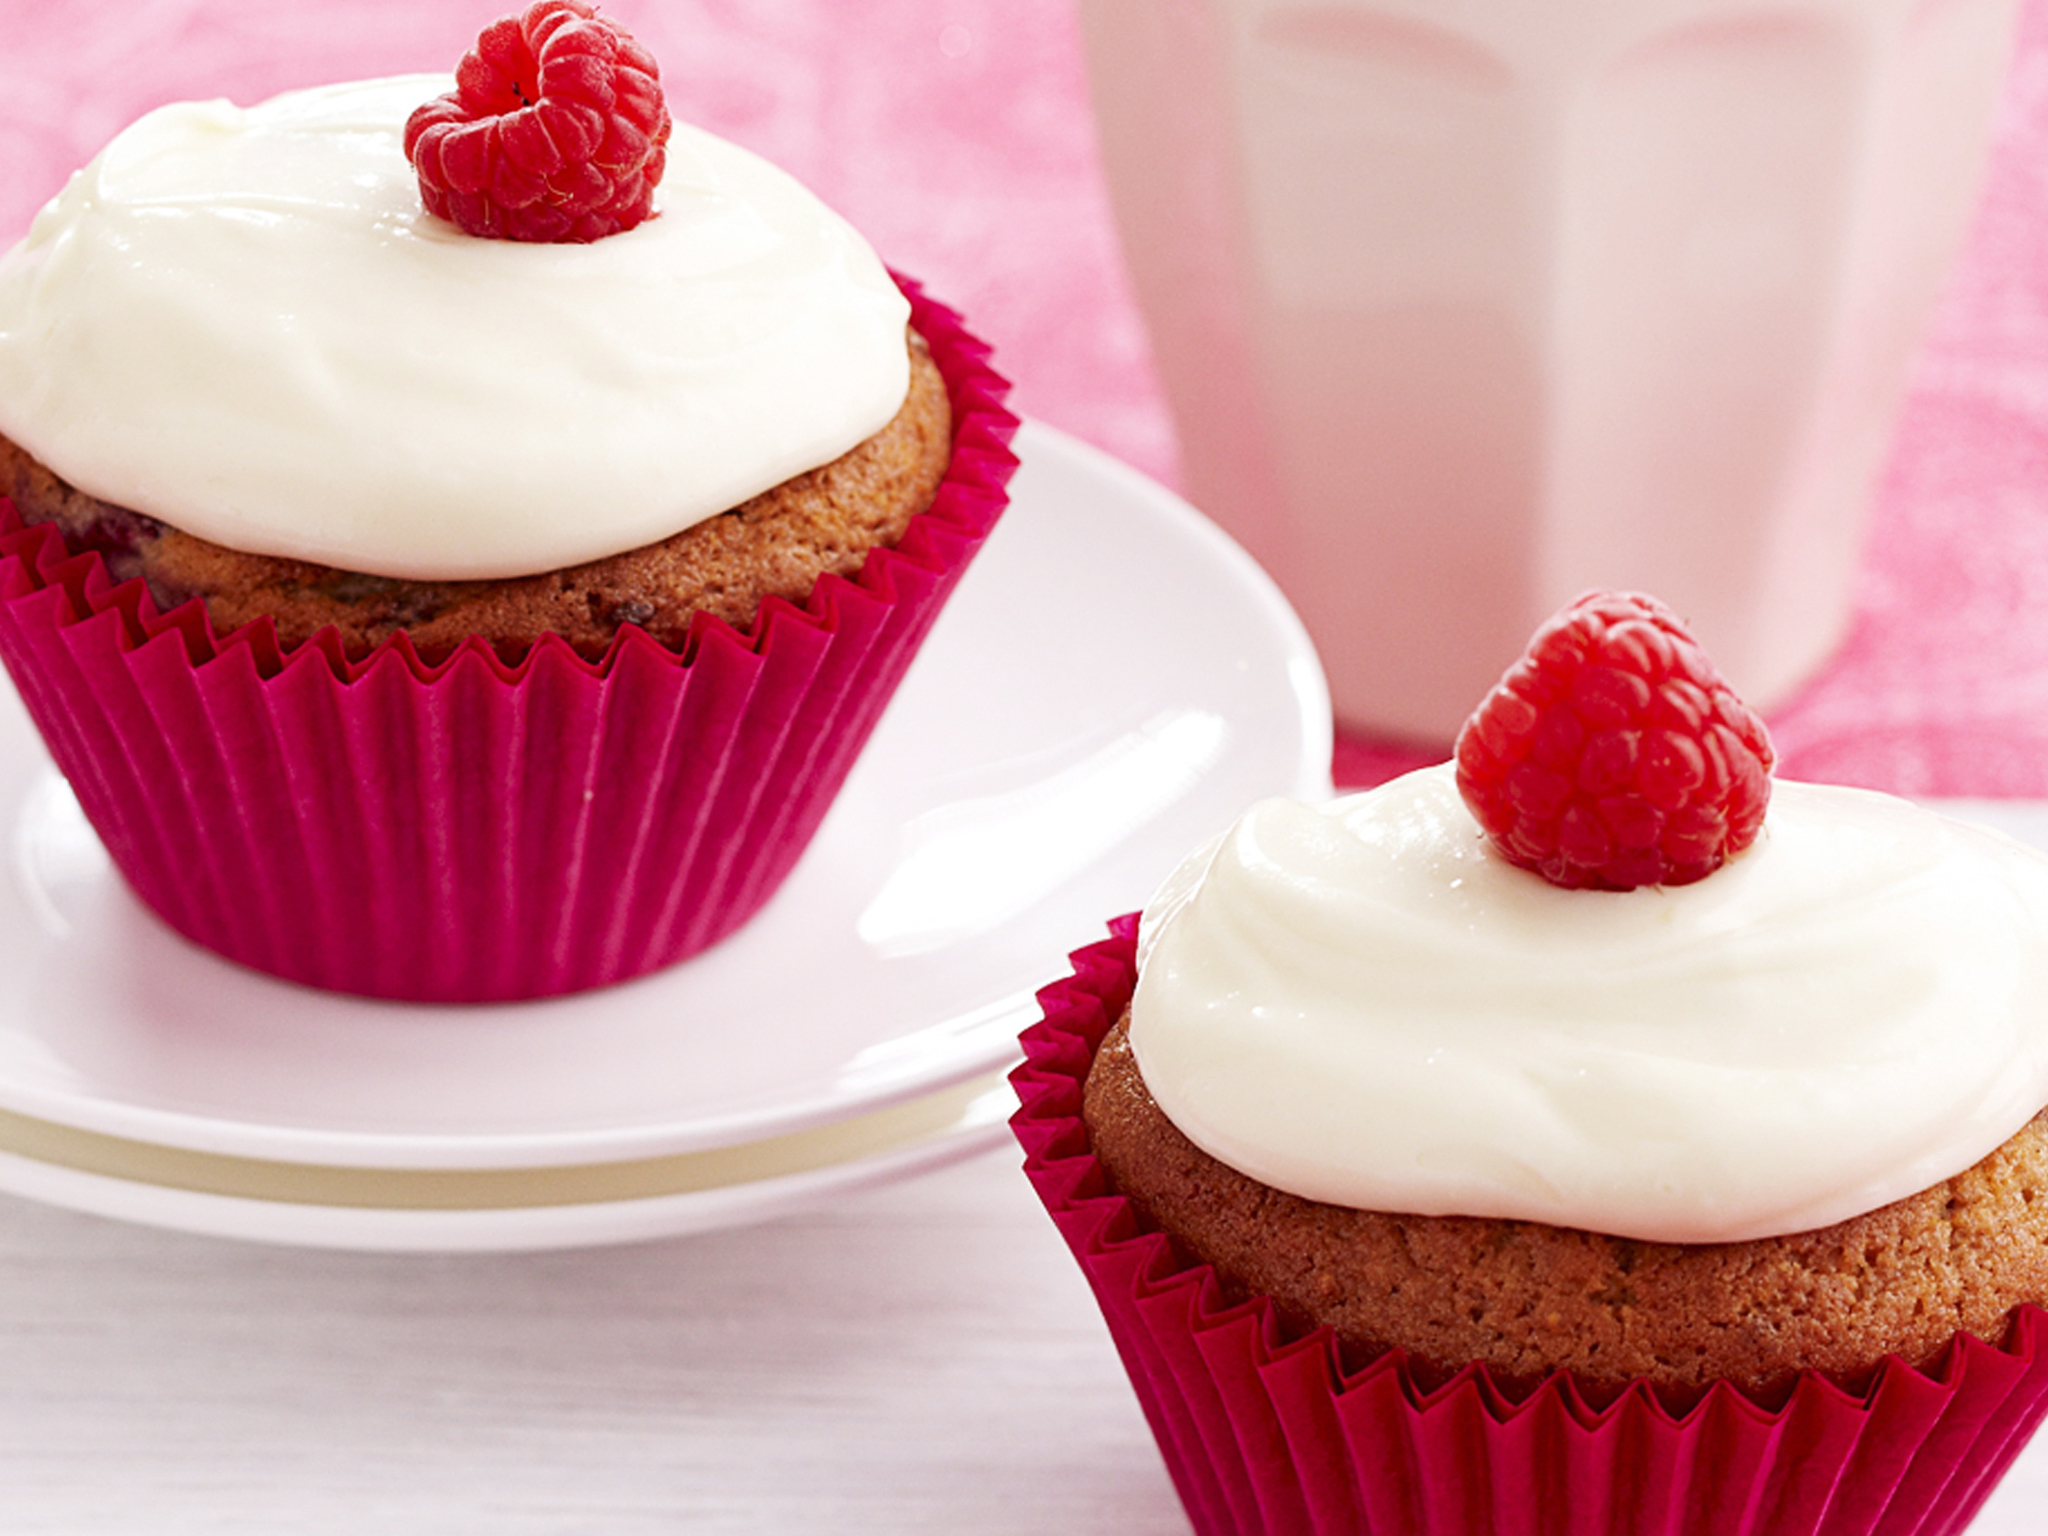 Lemon and raspberry cupcakes with cream cheese frosting